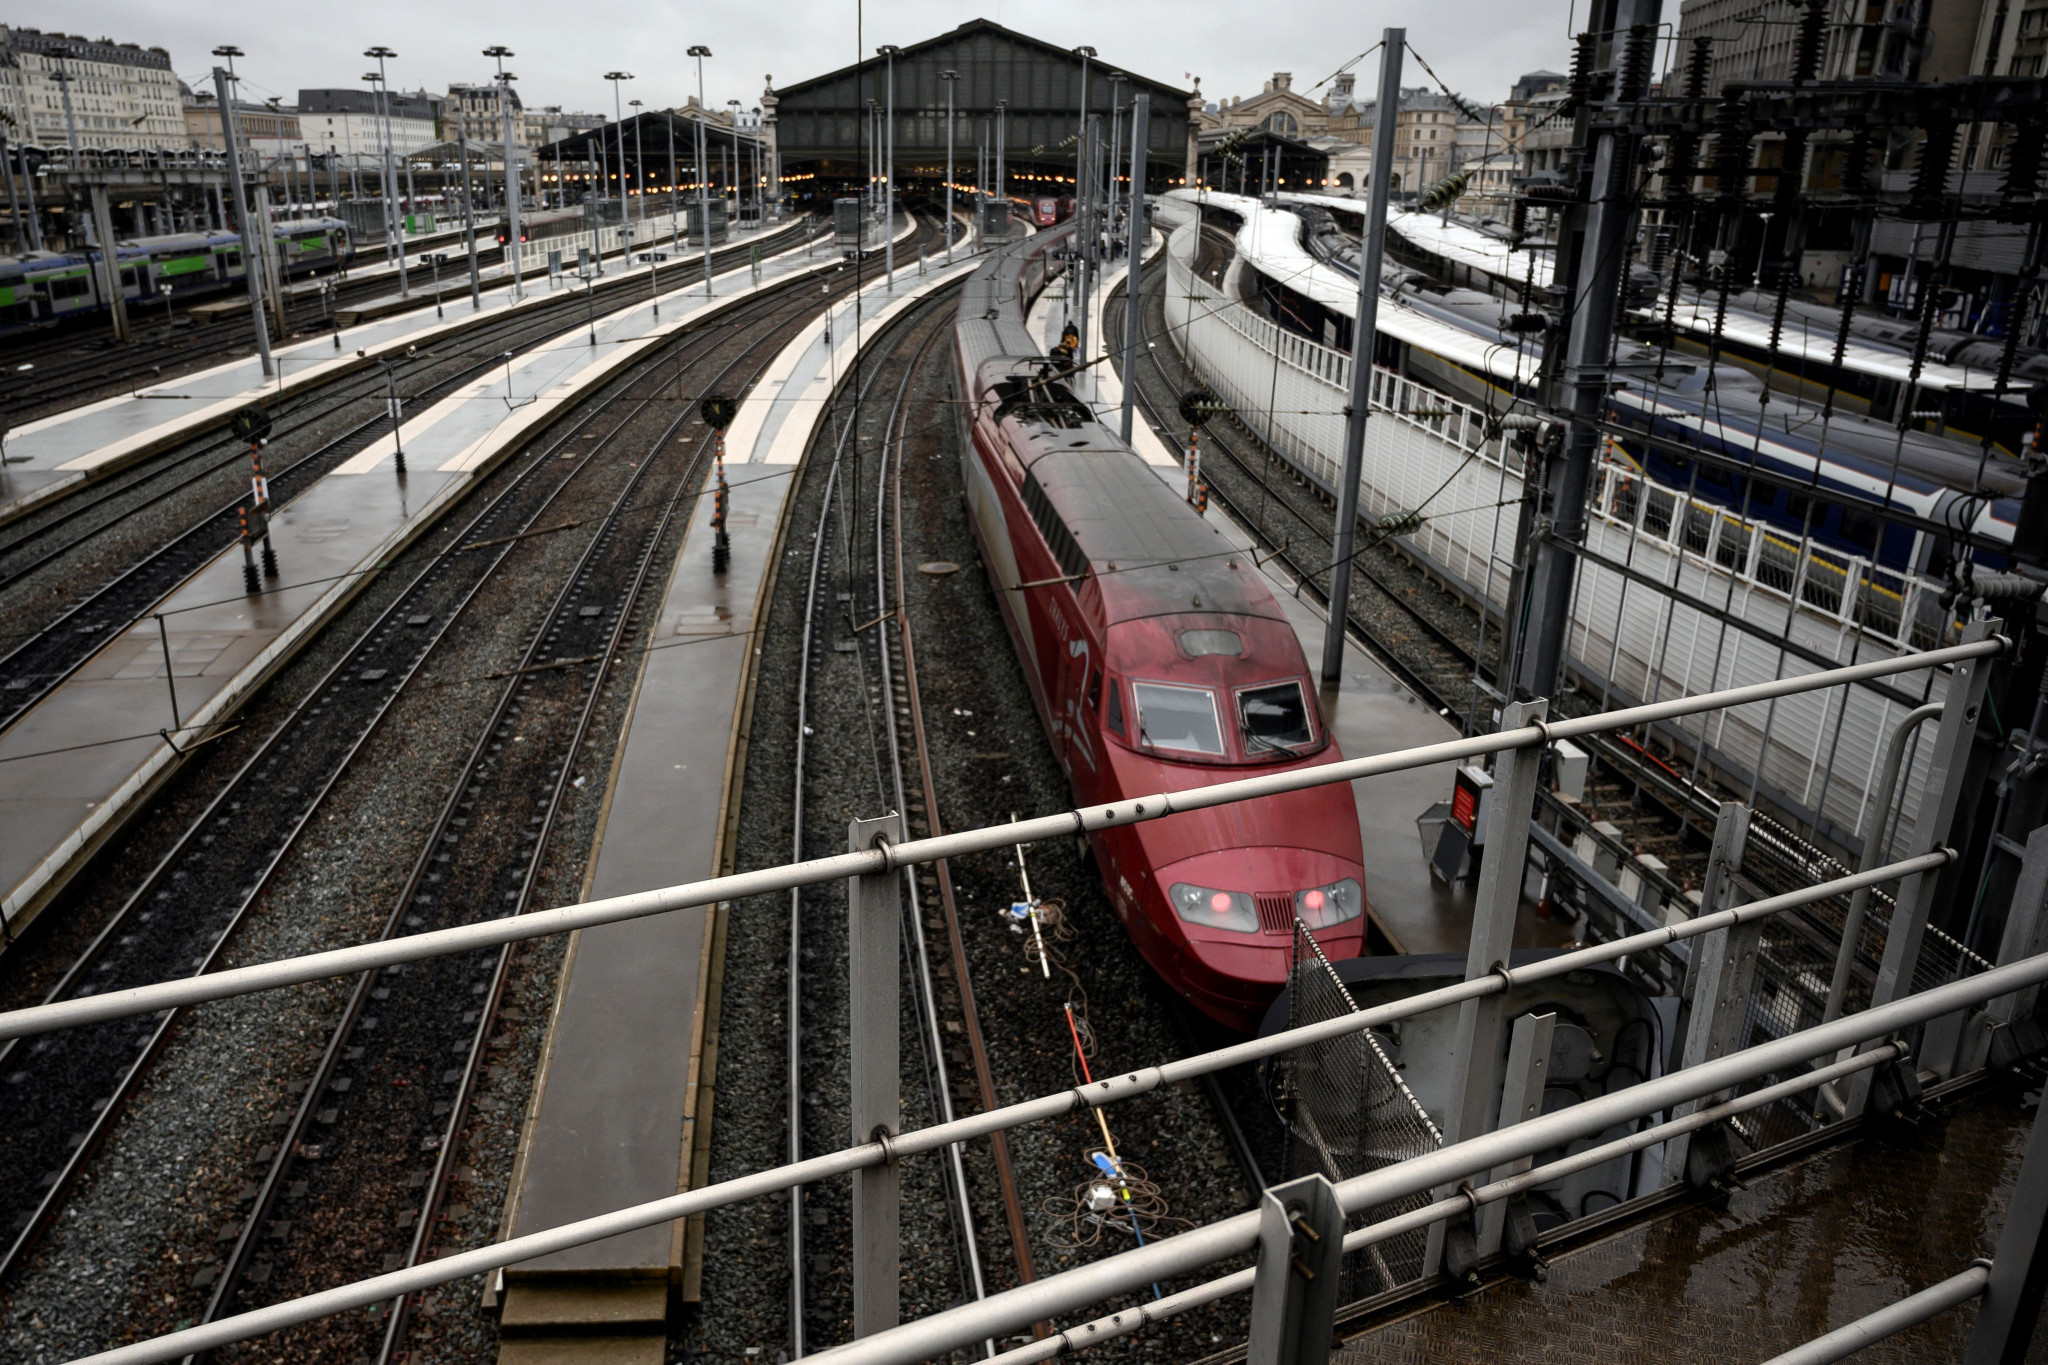 An expansion of Gare du Nord is among the ongoing transport projects in Paris ©Getty Images